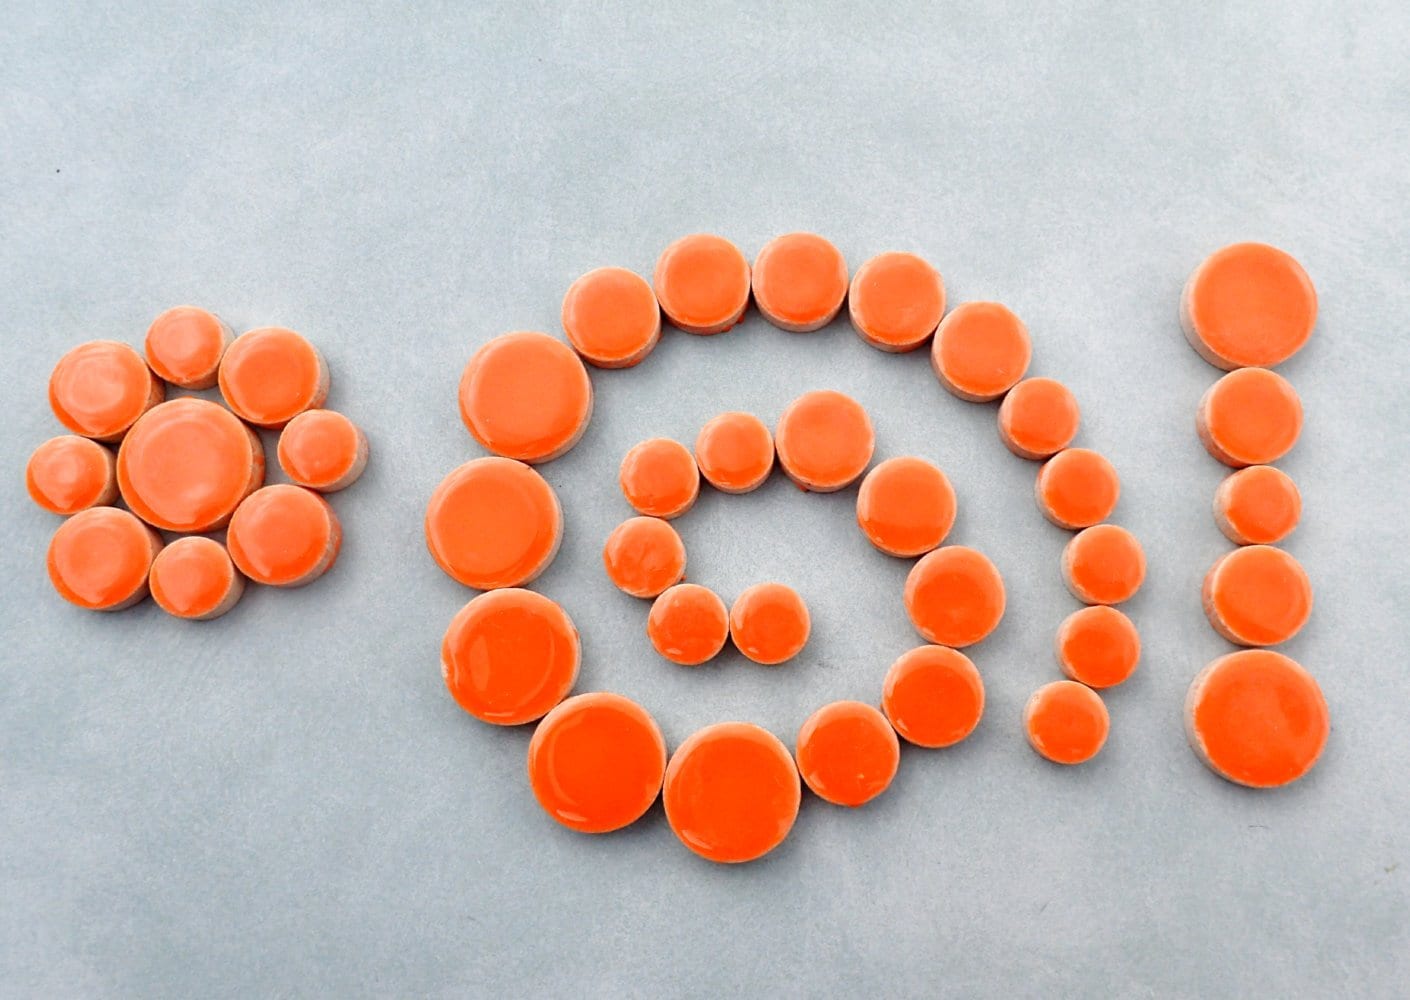 Orange Circles Mosaic Tiles - 50g Ceramic in Mix of 3 Sizes 1/2" and 3/4" and 5/8"